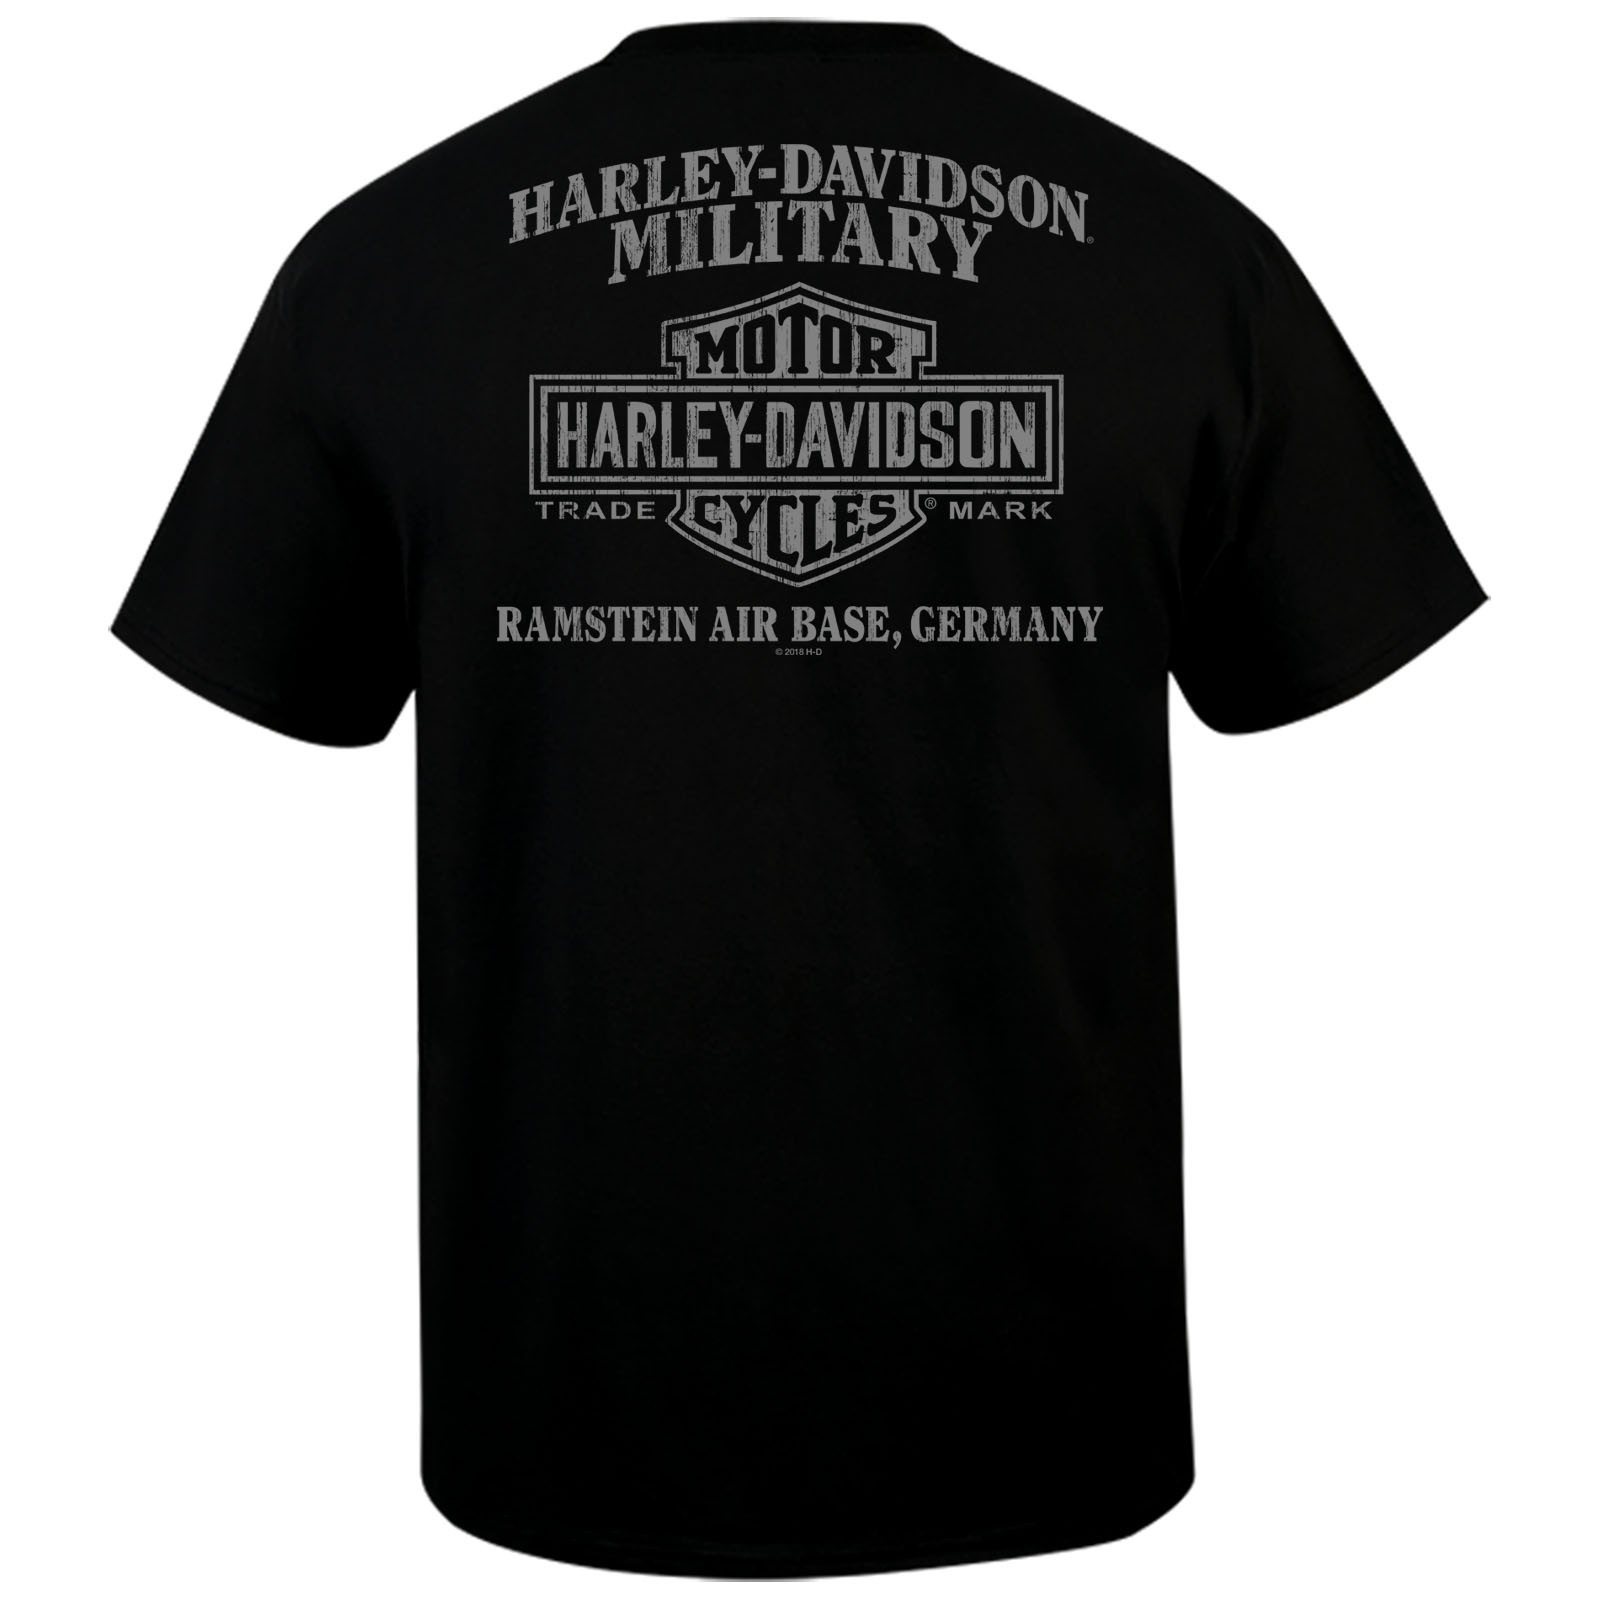 Harley davidson t shirt made in usa sizes – Children’s size guide uk ...